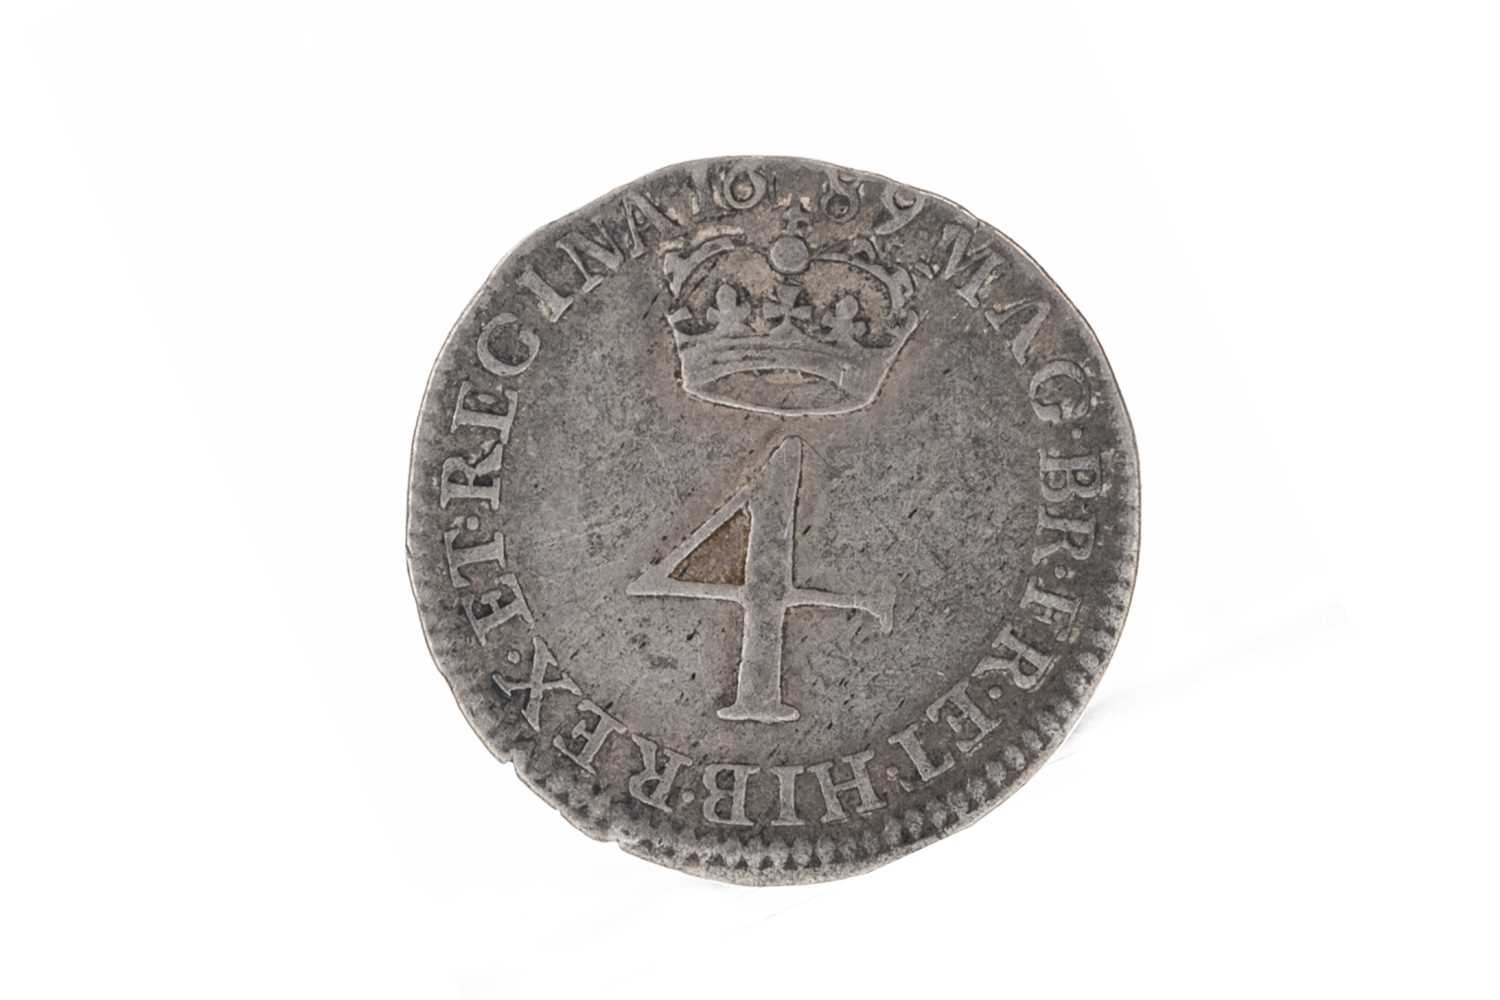 Lot 127 - WILLIAM AND MARY (1689 - 1694) FOURPENCE MAUNDY COIN DATED 1689